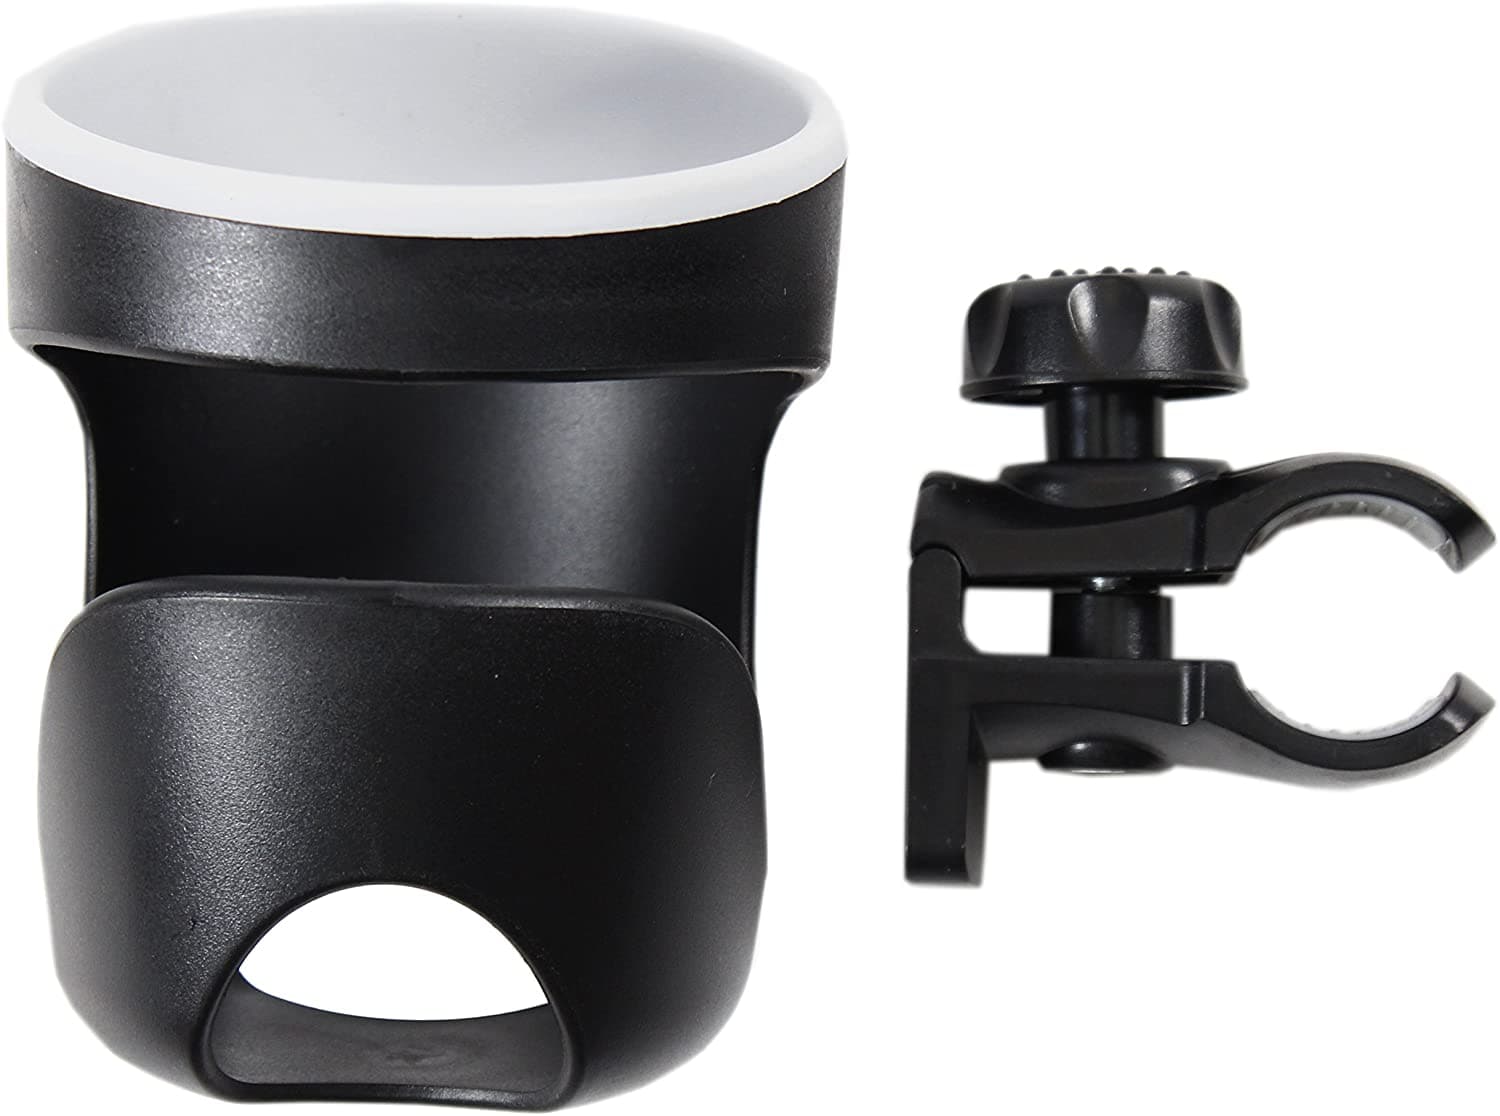 Essential Medical Supply Single Cup Holder for Wheelchairs - Senior.com Cup Holders